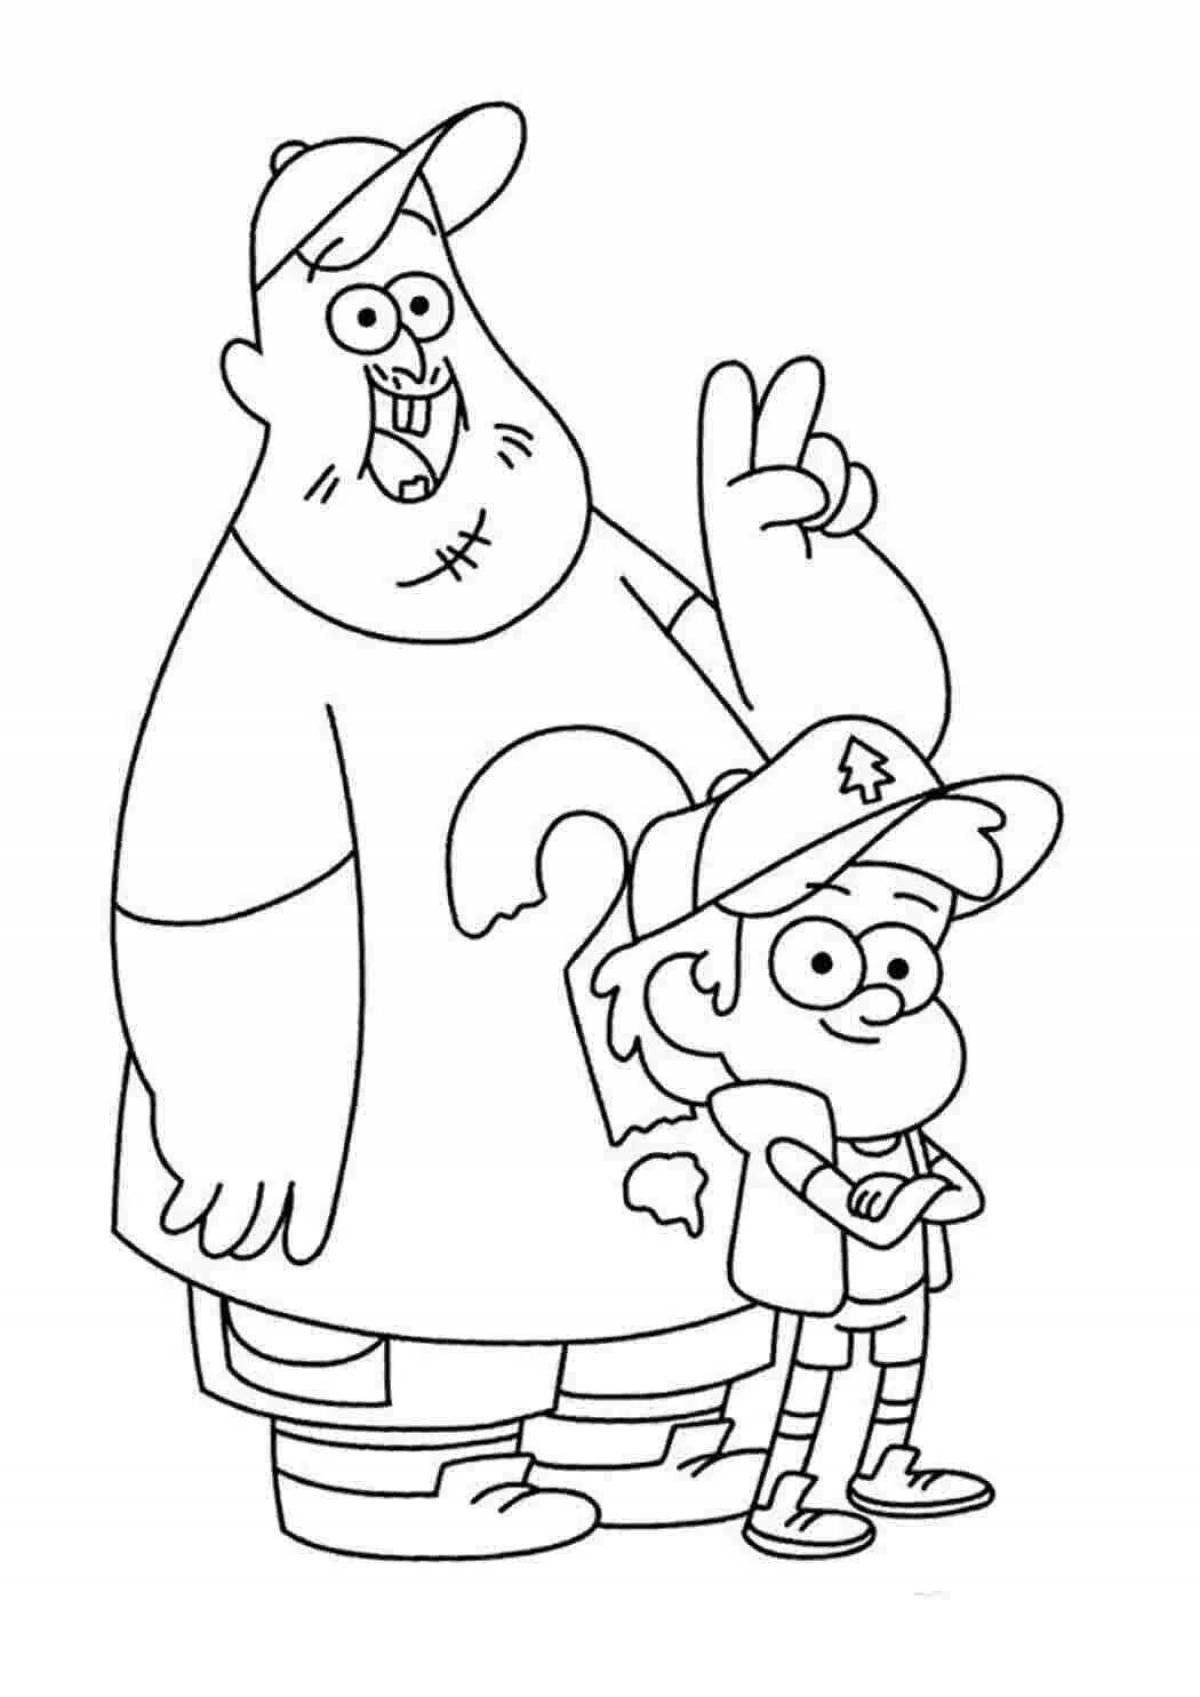 Great Gravity Falls Coloring Pages